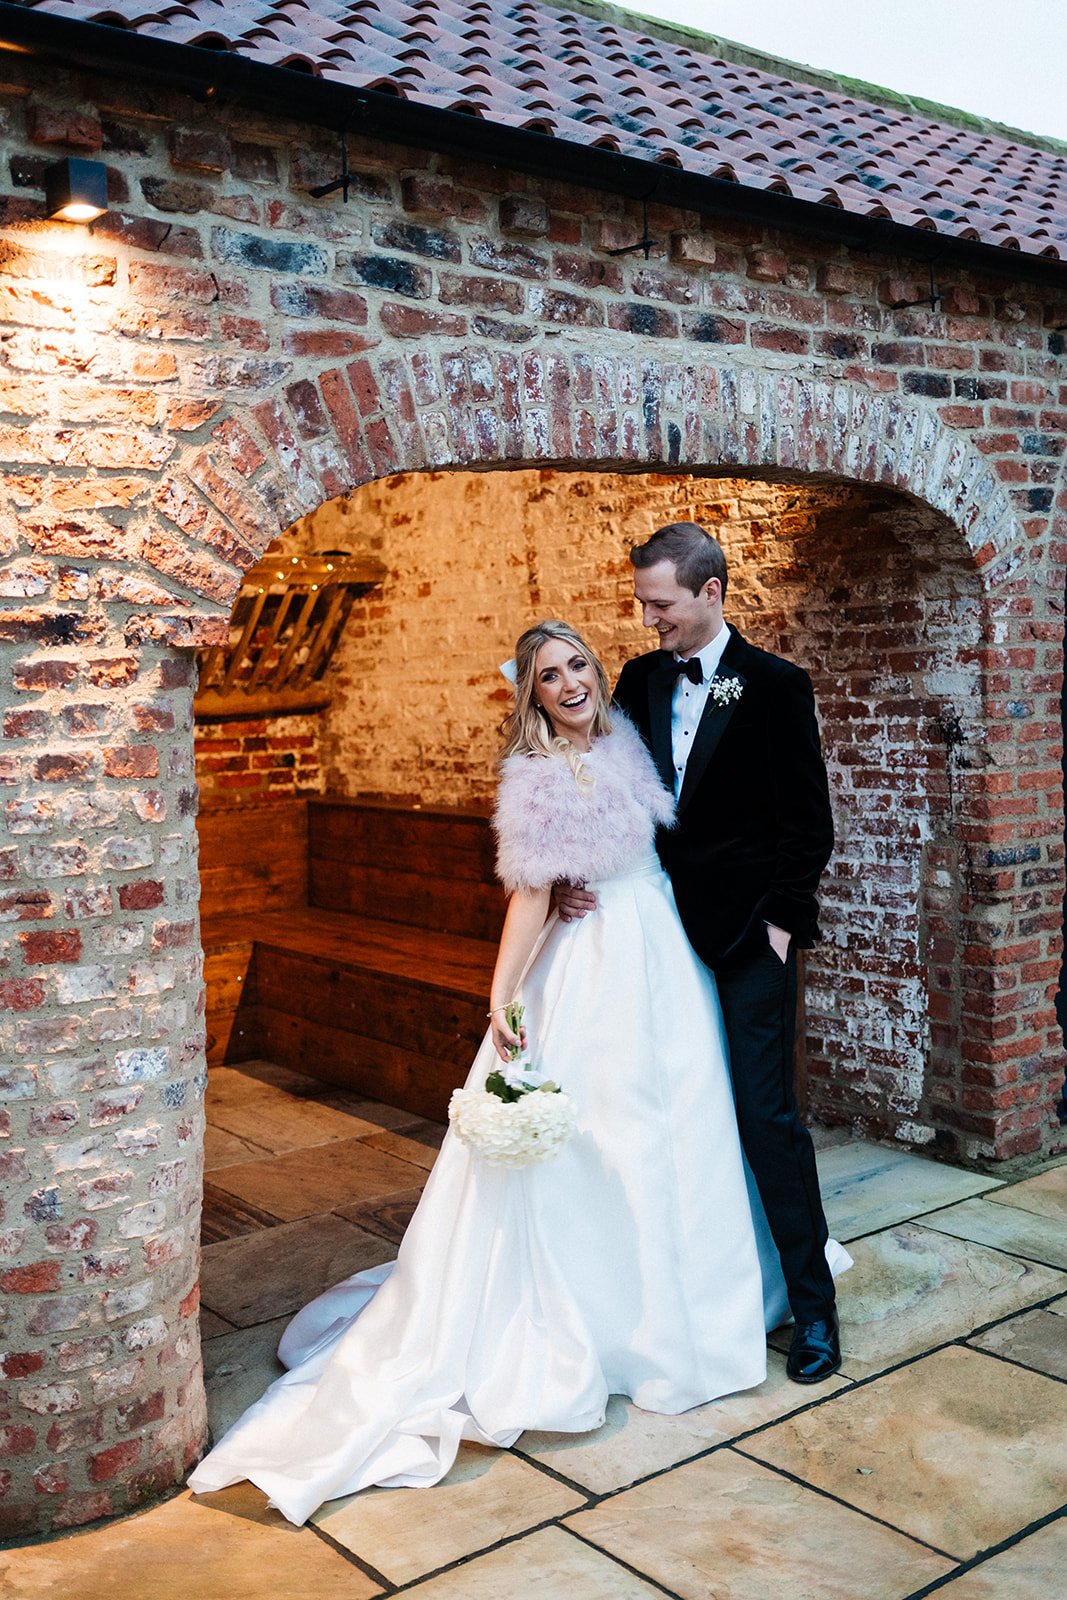 Bride and groom stand close next to a barn building and are laughing together